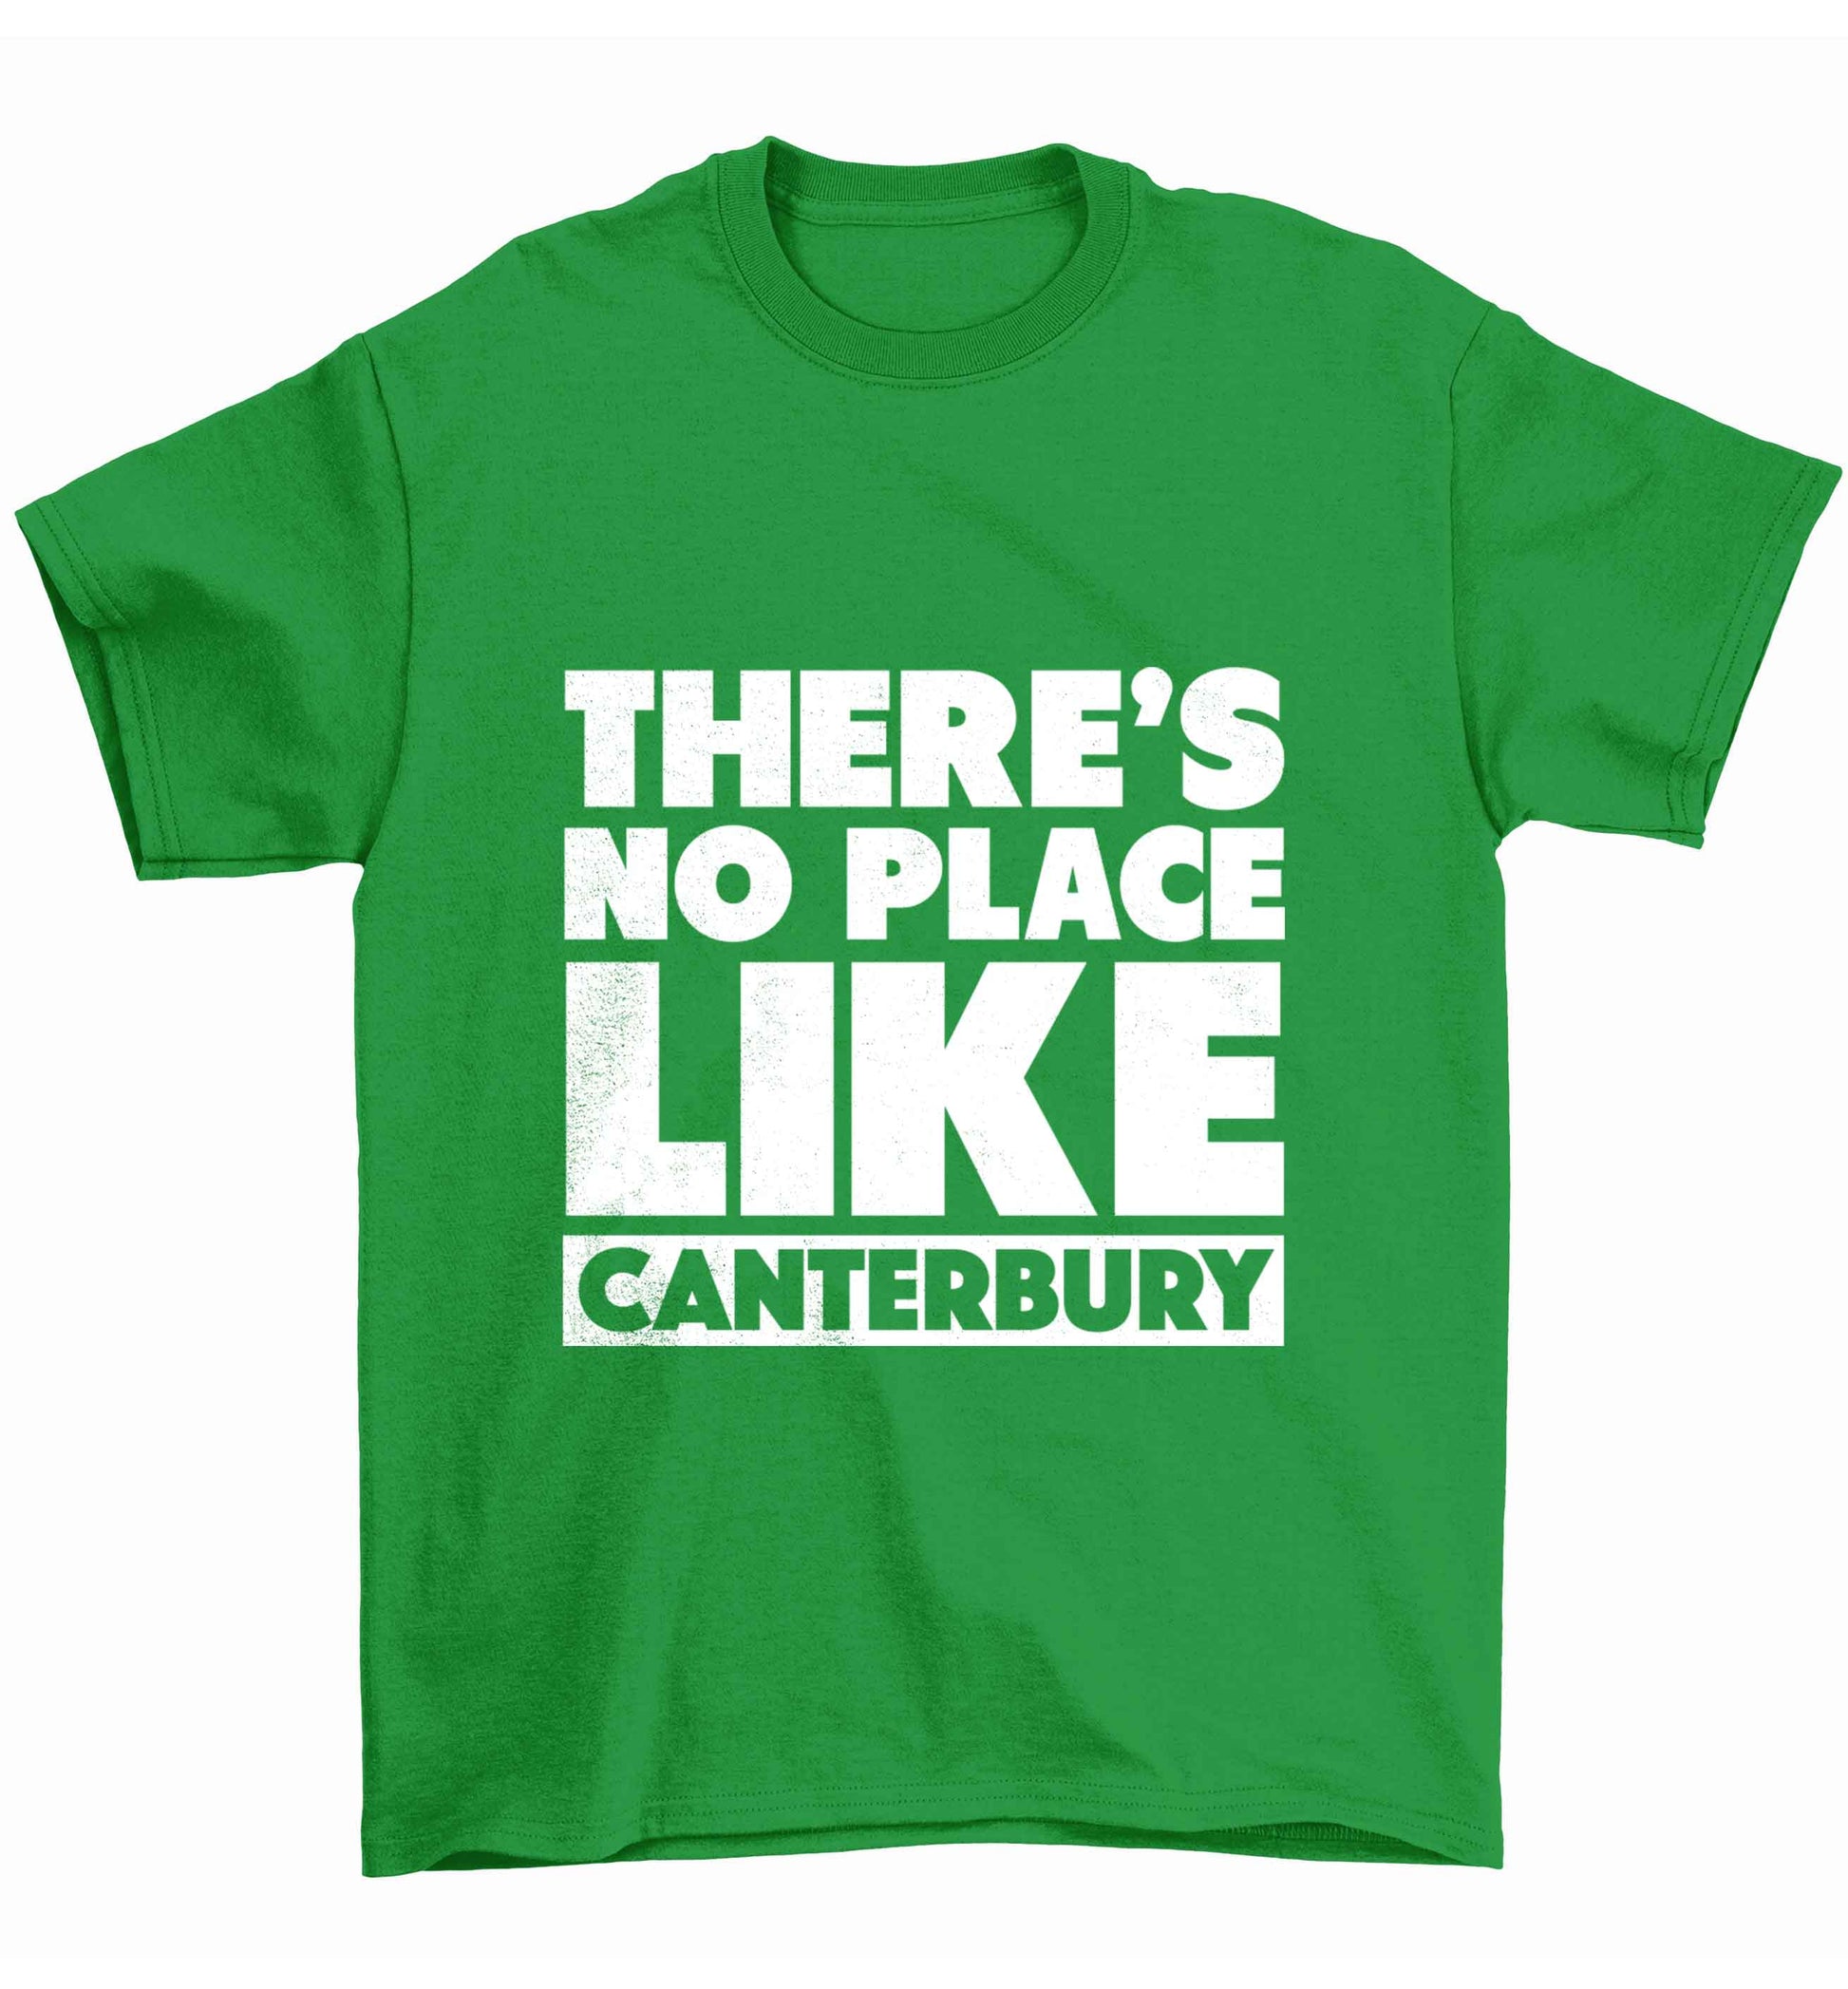 There's no place like Canterbury Children's green Tshirt 12-13 Years